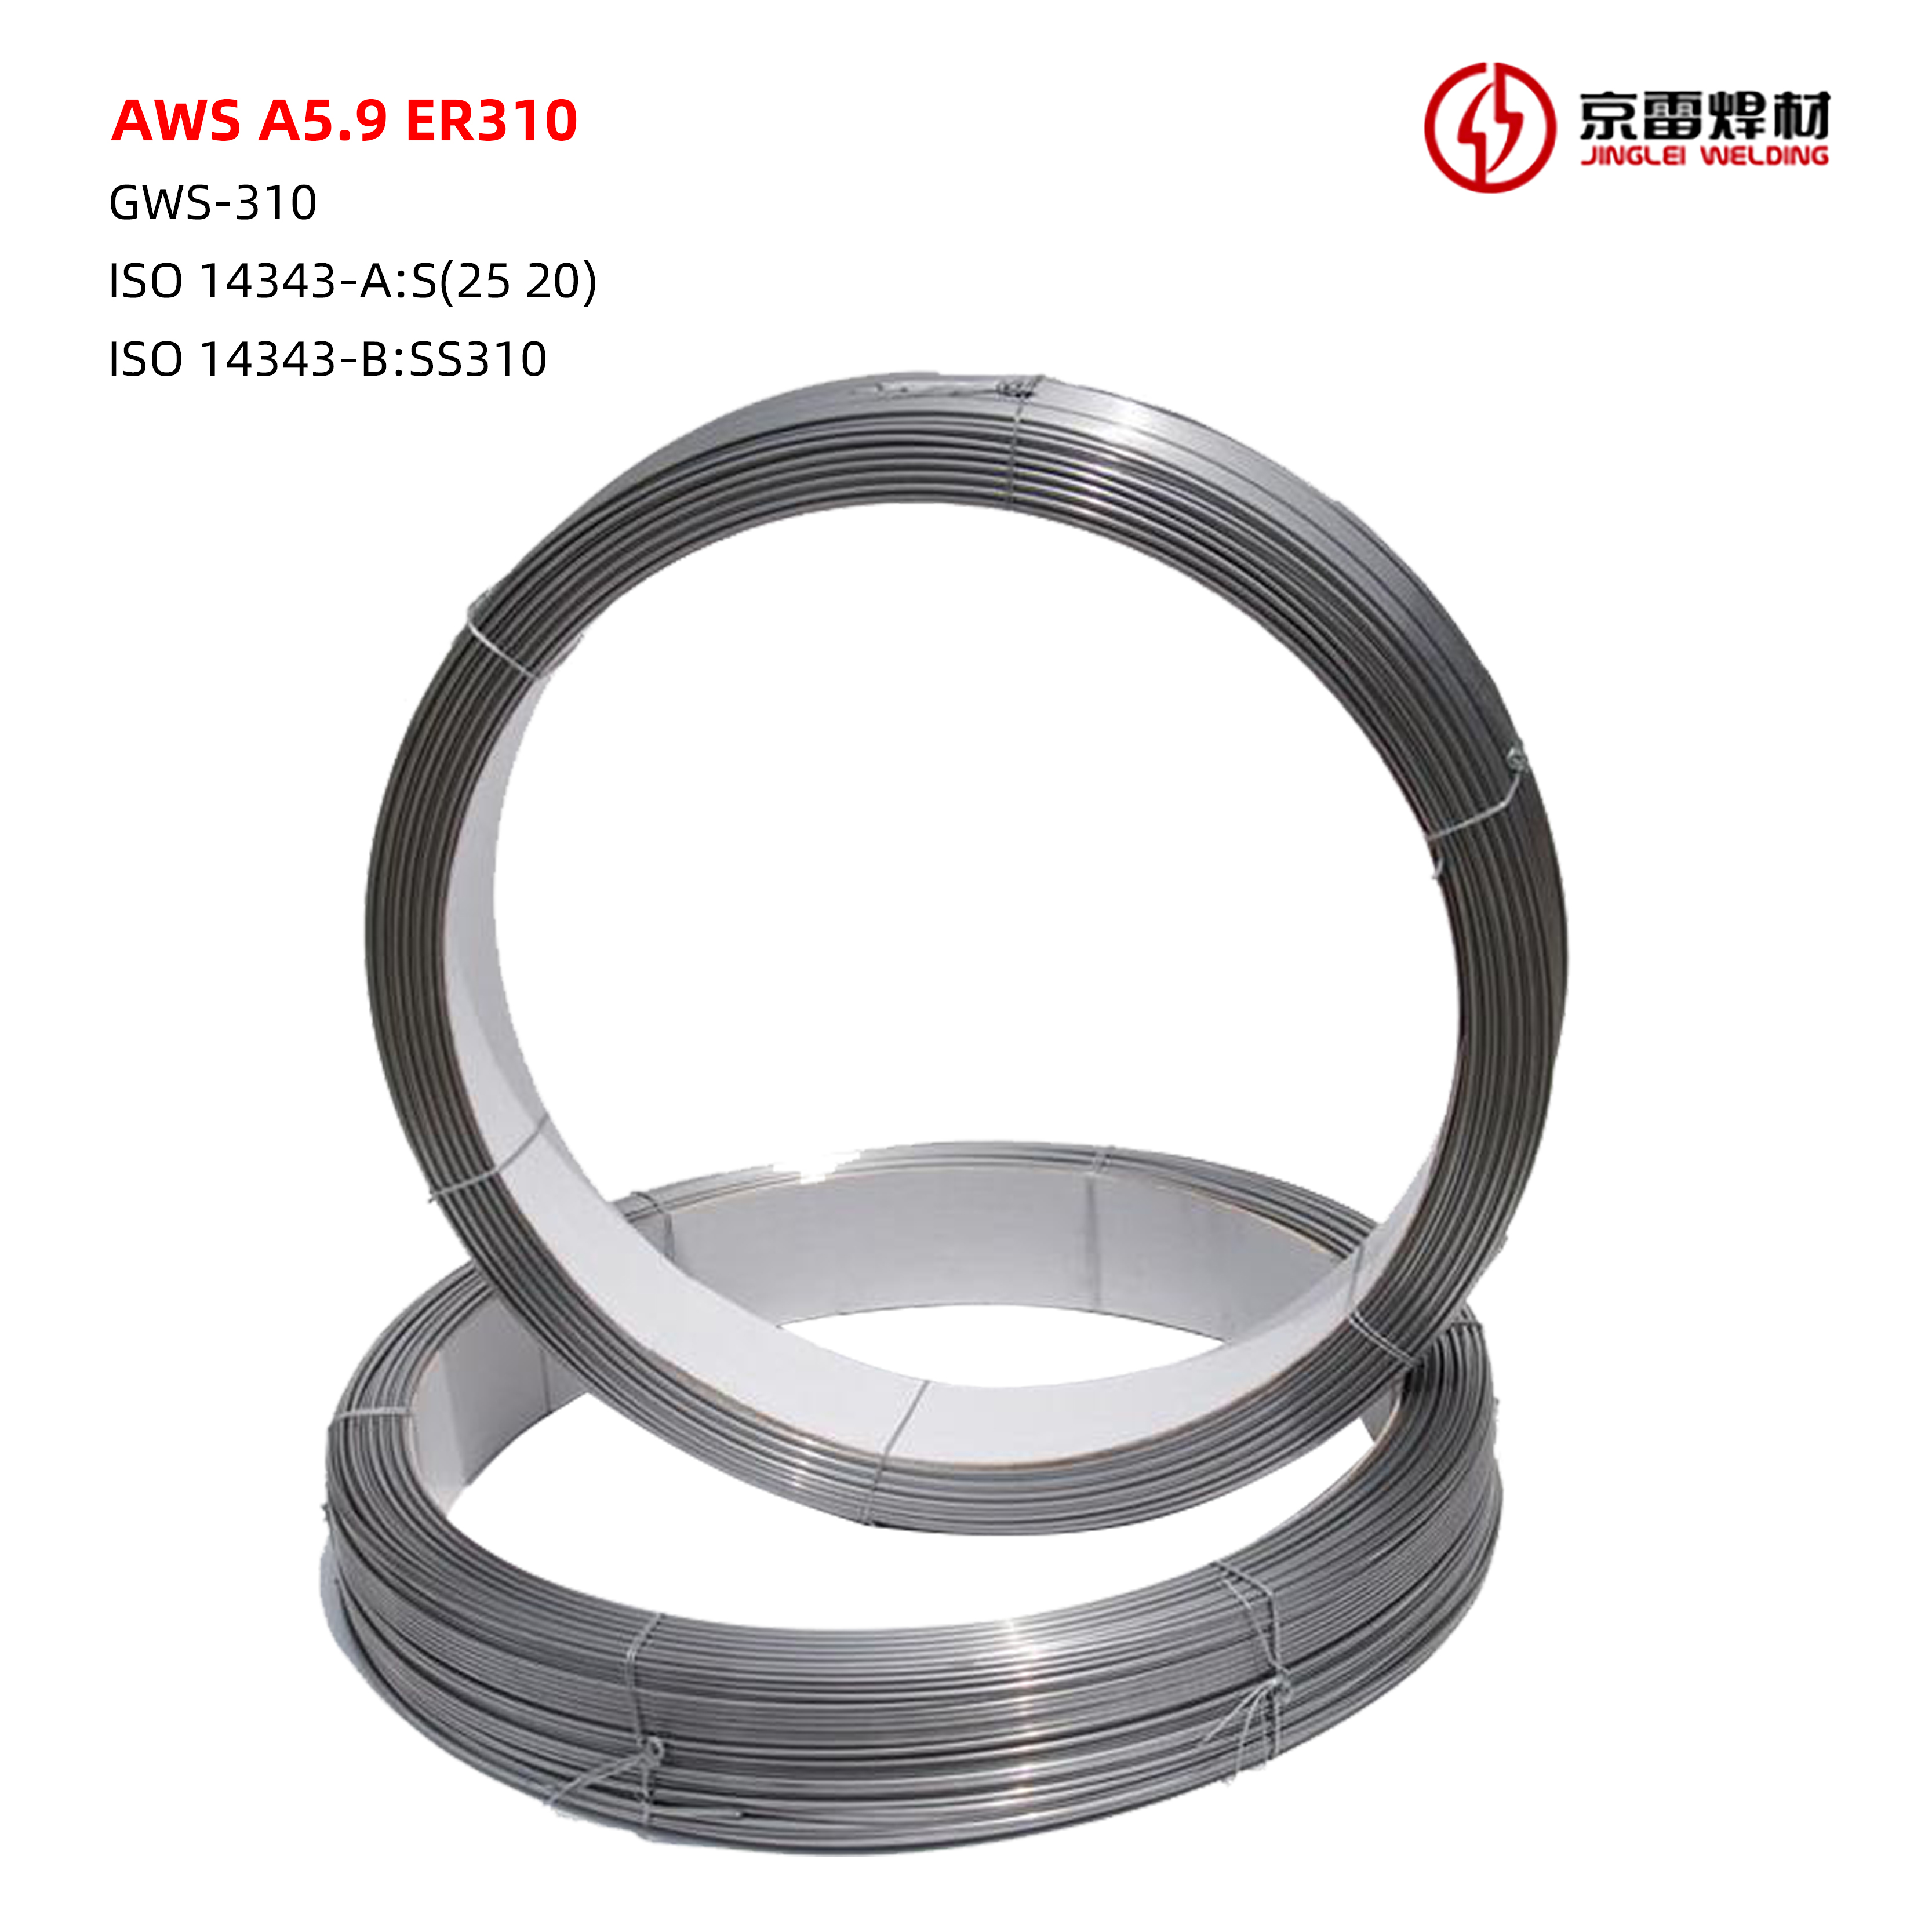 Stainless steels SAW welding wire ER310 and flux Welding data